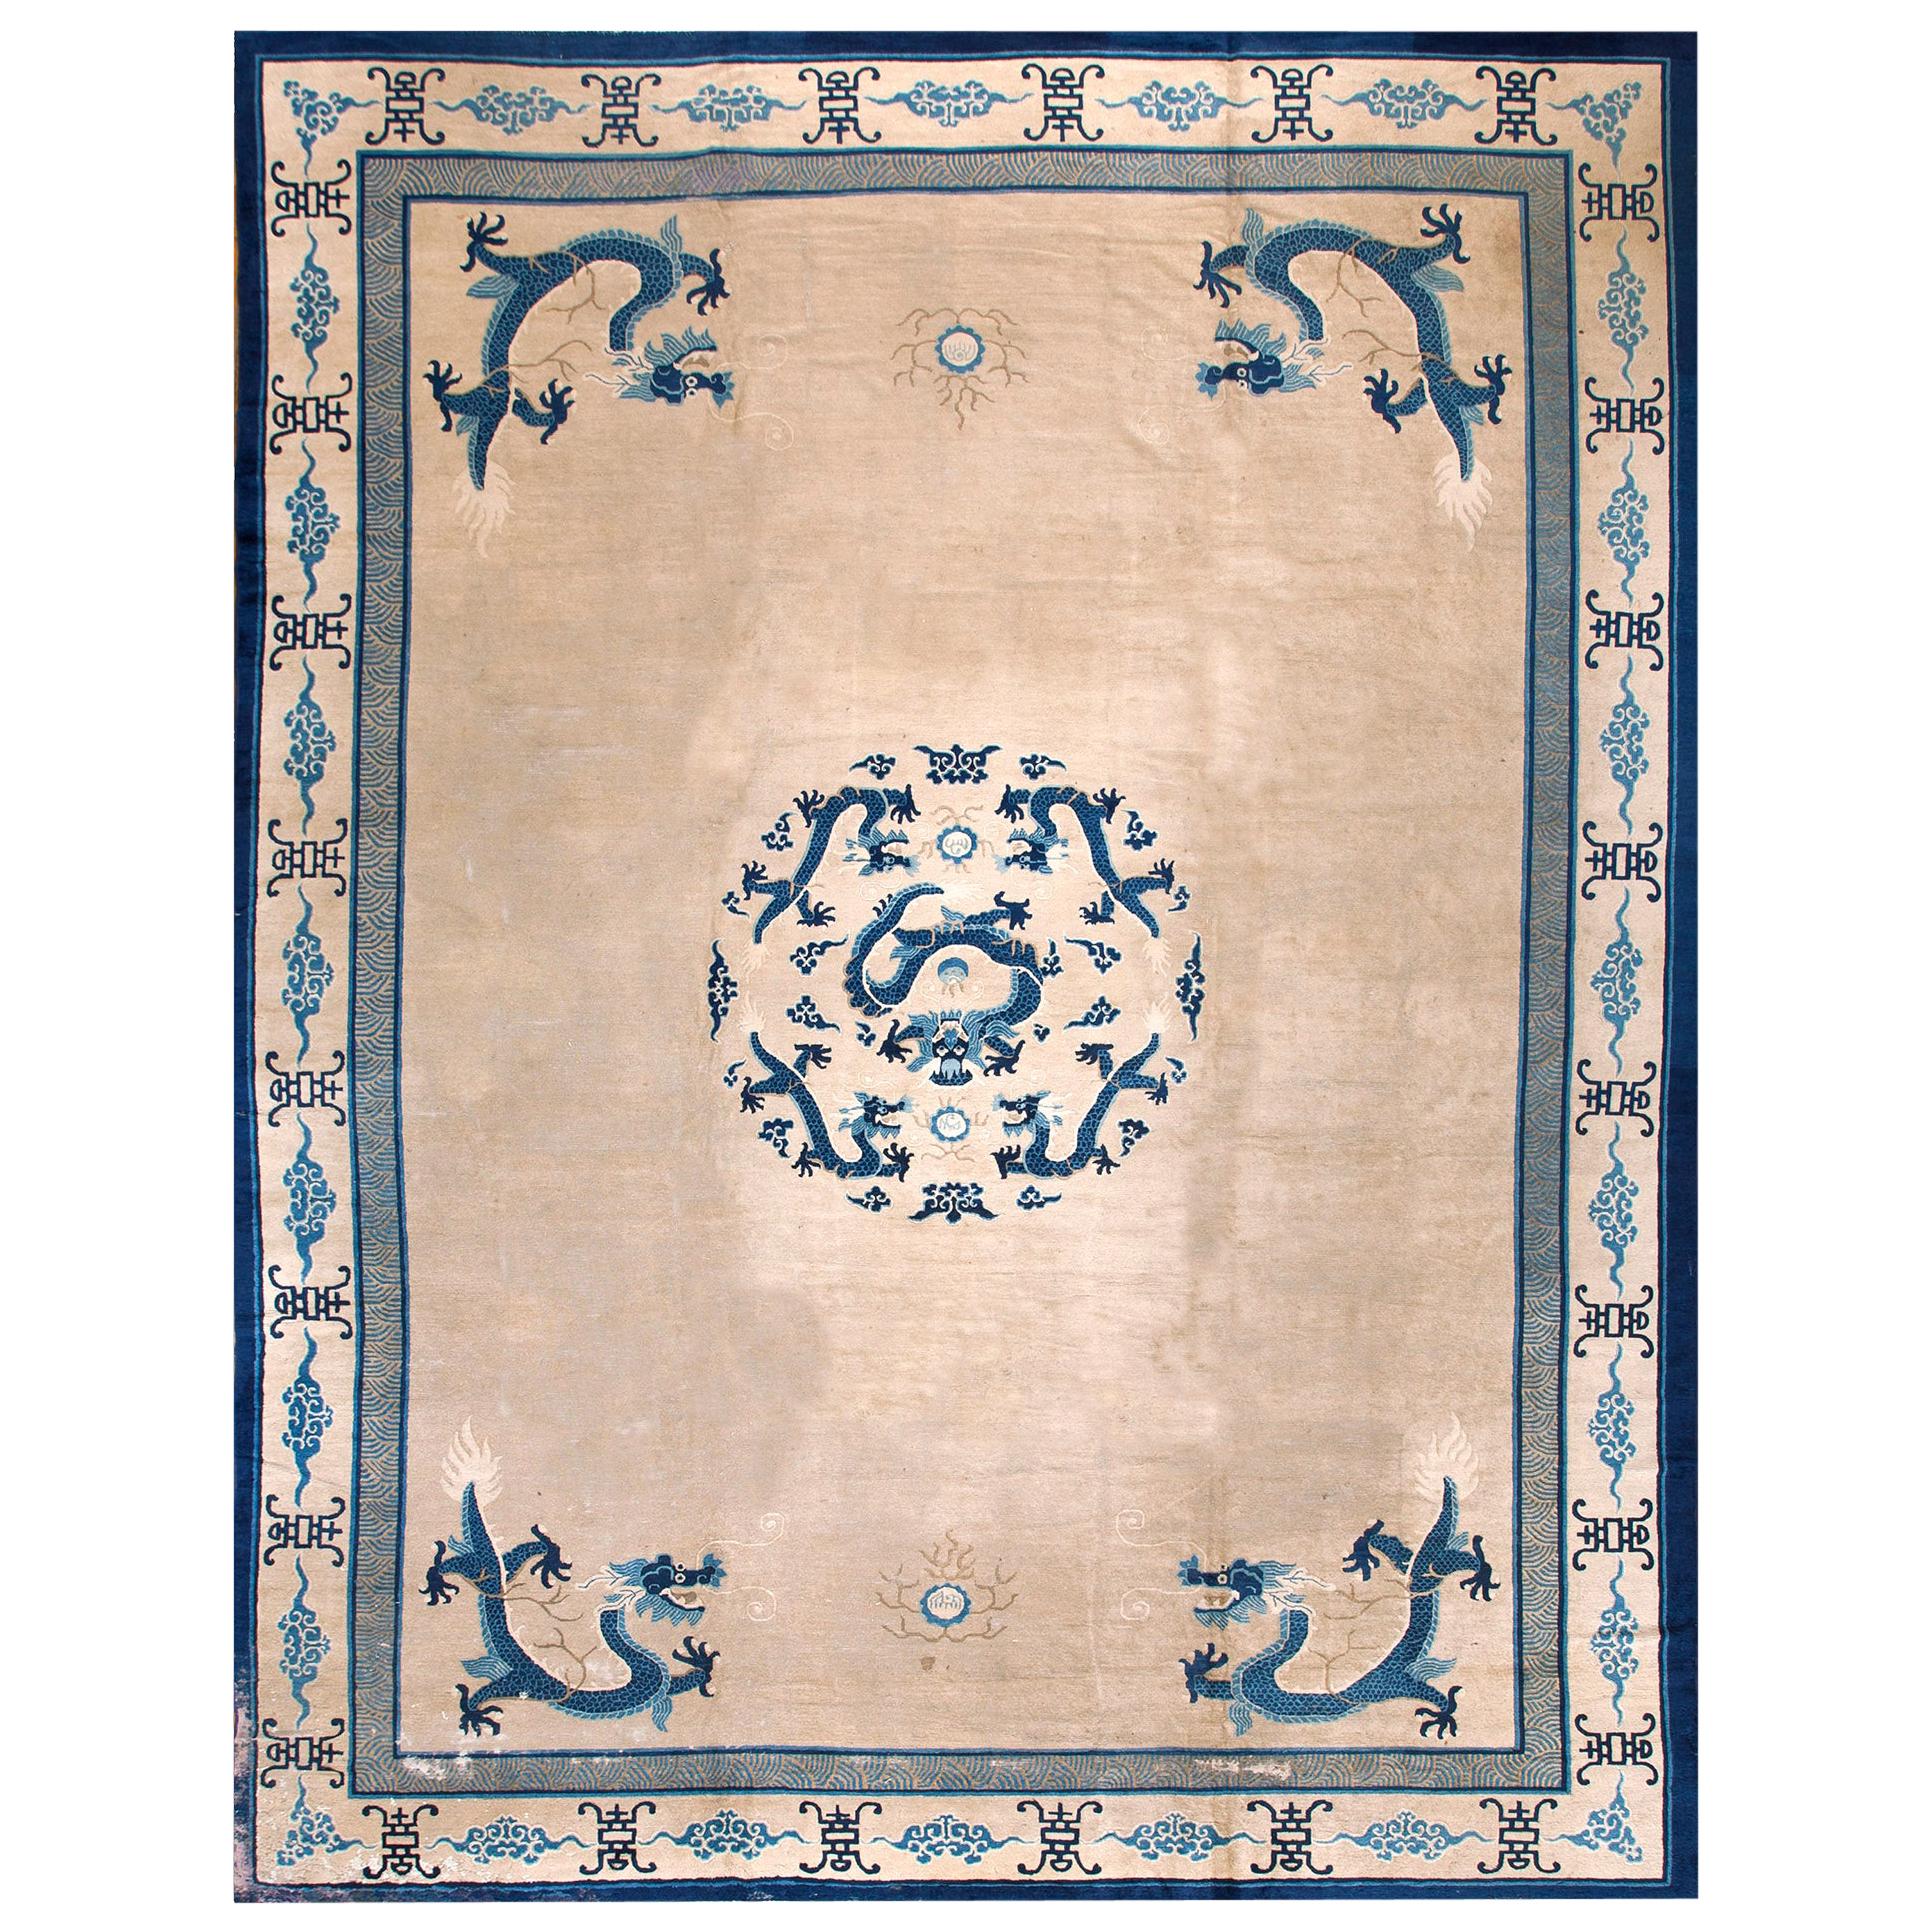 Antique Chinese Peking Rug 11' 10" x 15' 6" For Sale